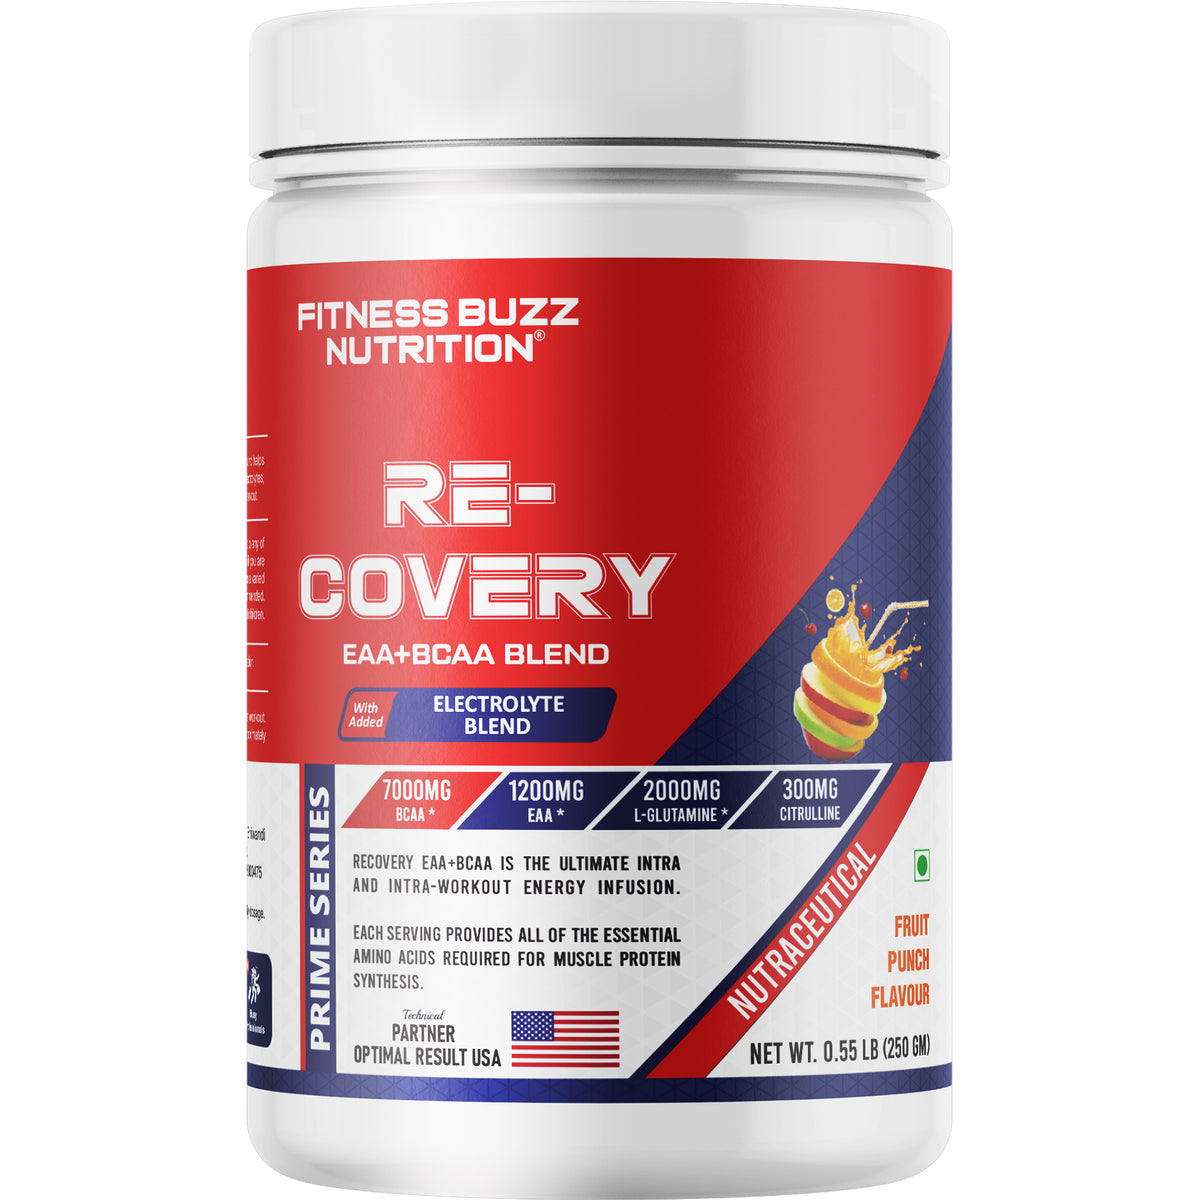 FITNESS BUZZ RE-COVERY (FRUIT PUNCH)